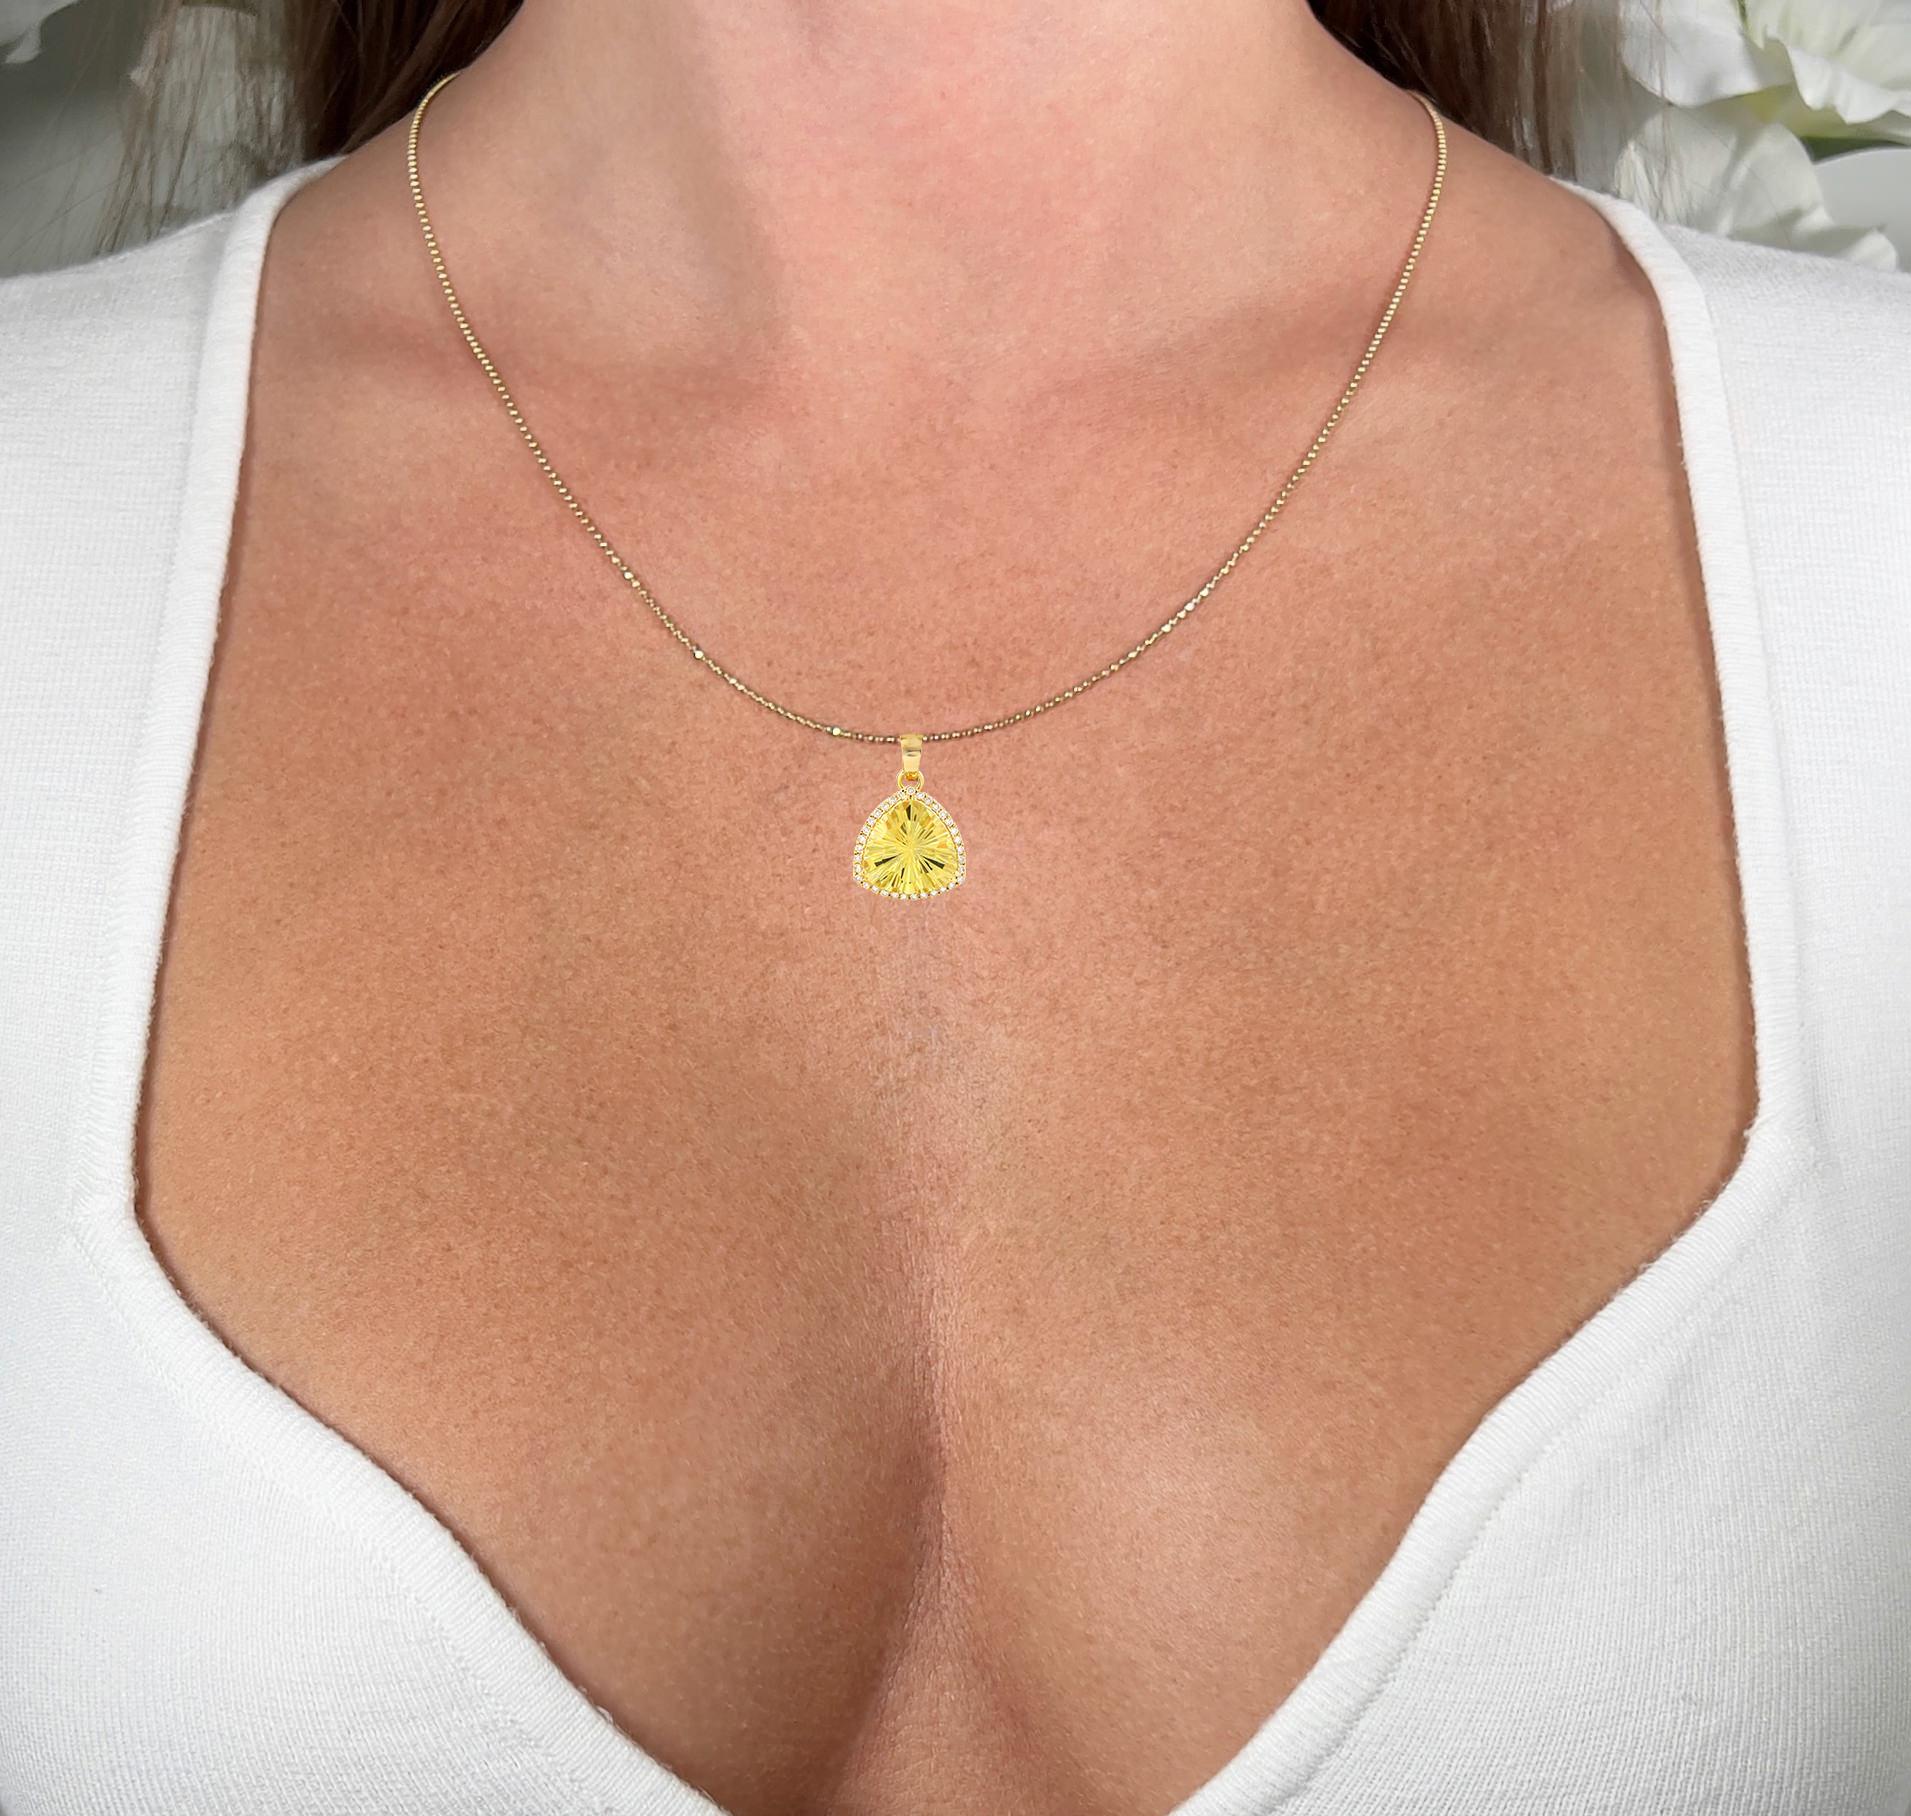 It comes with the Gemological Appraisal by GIA GG/AJP
All Gemstones are Natural
Yellow Quartz = 5.38 Carats
Diamonds = 0.25 Carats
Metal: 18K Yellow Gold
Pendant Dimensions: 22 x 15 mm